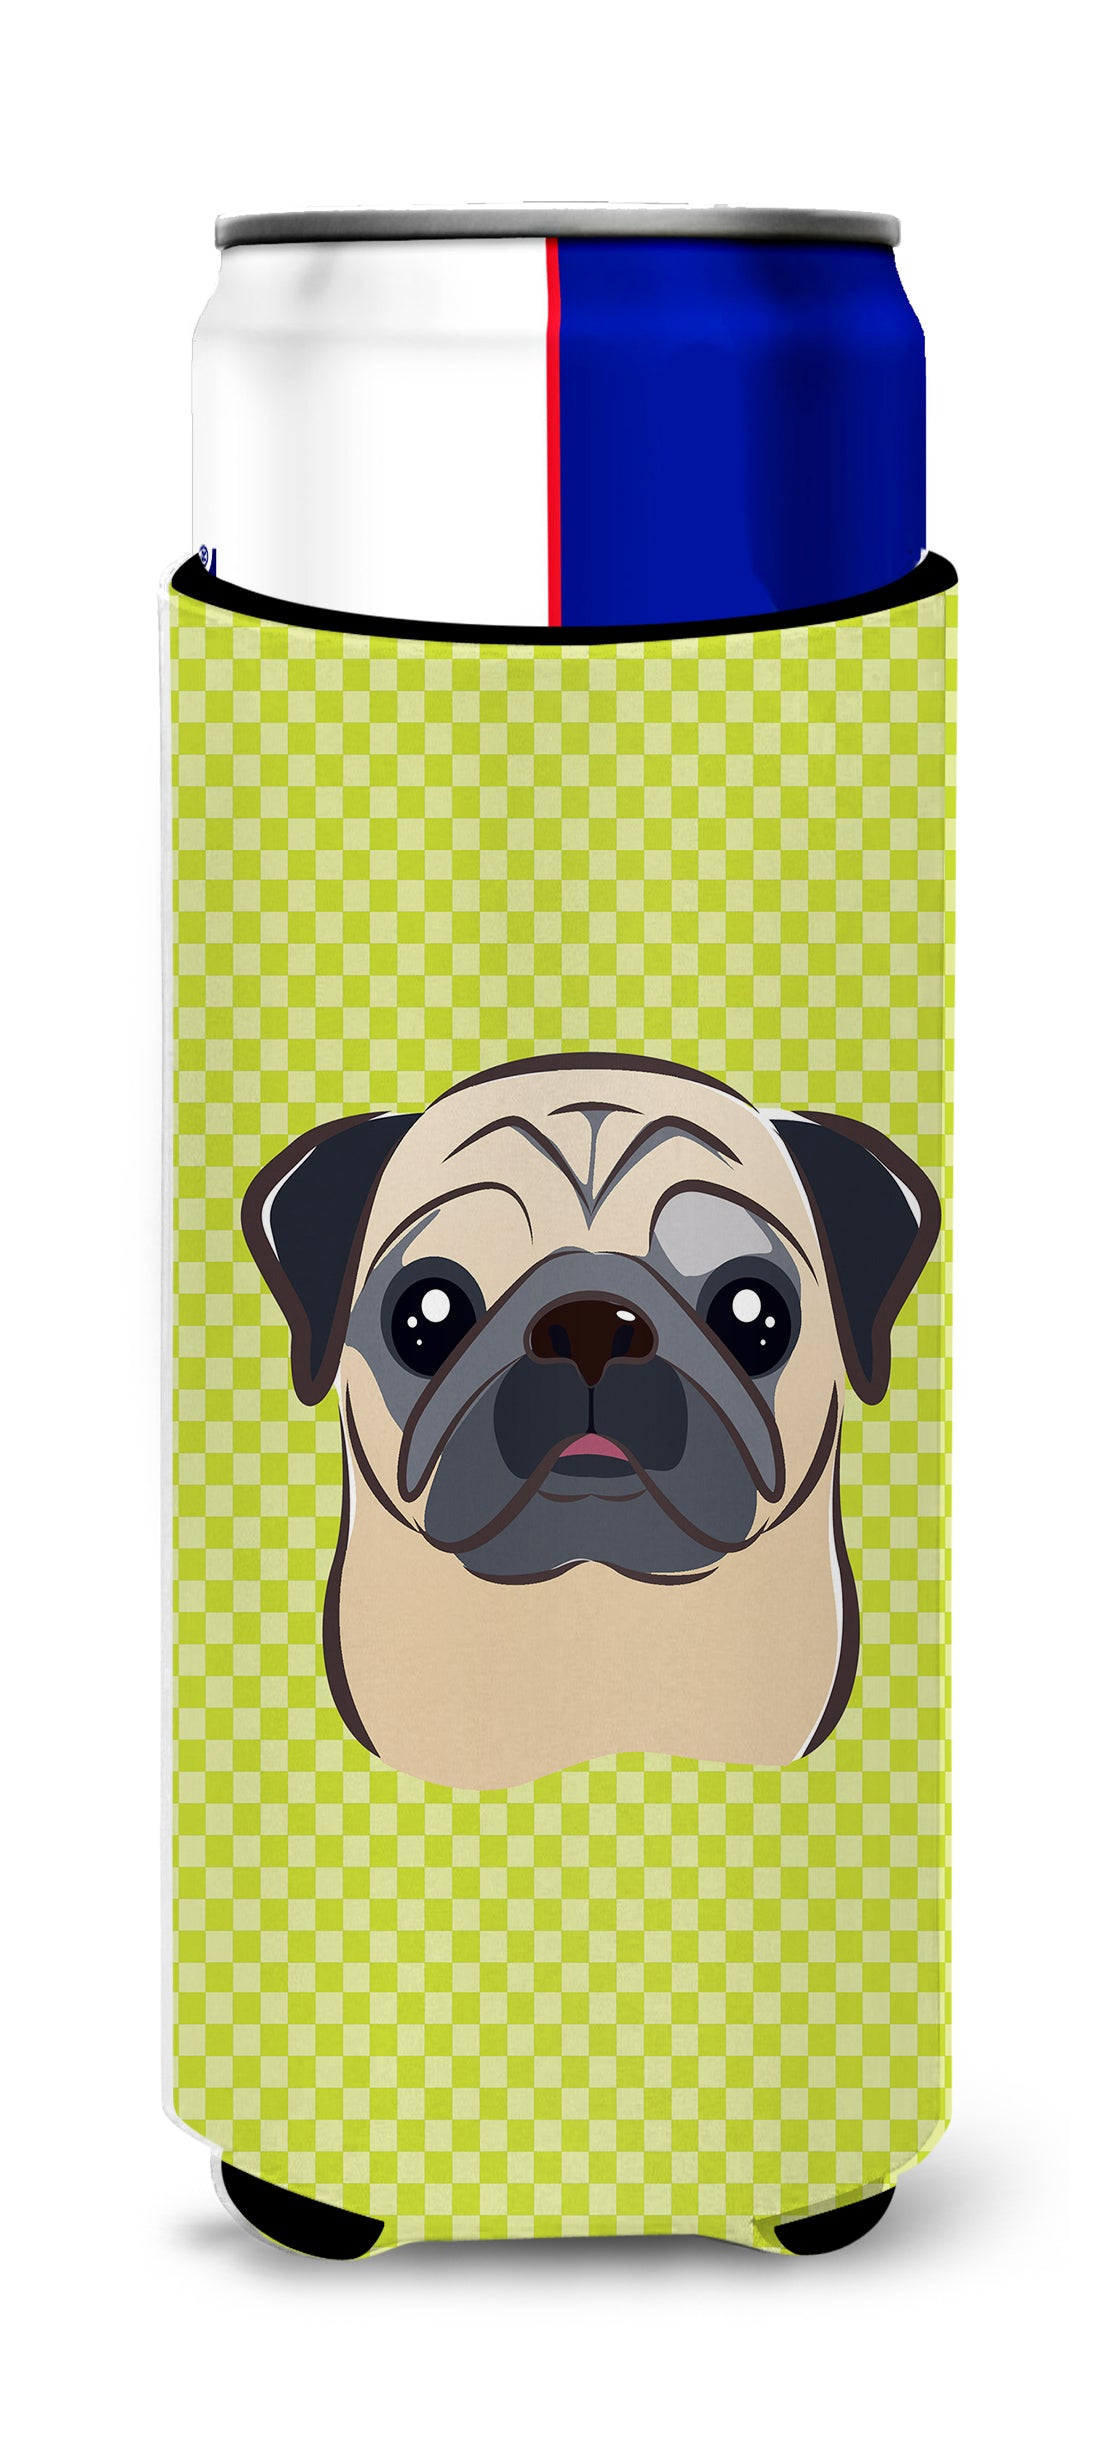 Checkerboard Lime Green Fawn Pug Ultra Beverage Insulators for slim cans BB1324MUK.